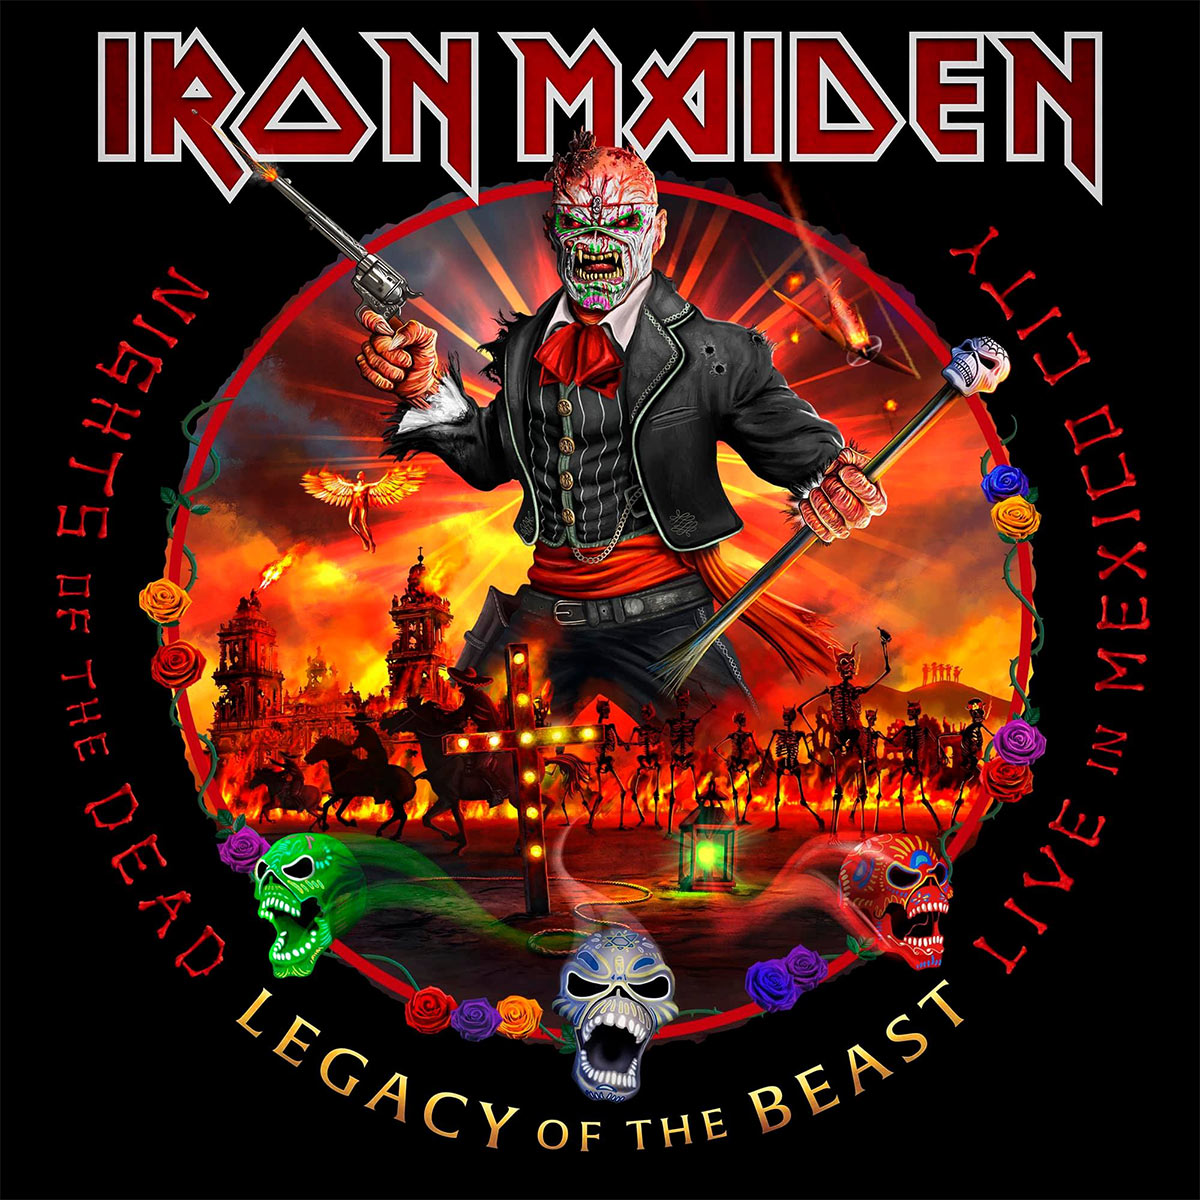 Iron Maiden - Nights Of The Dead, Legacy Of The Beast: Live In Mexico City